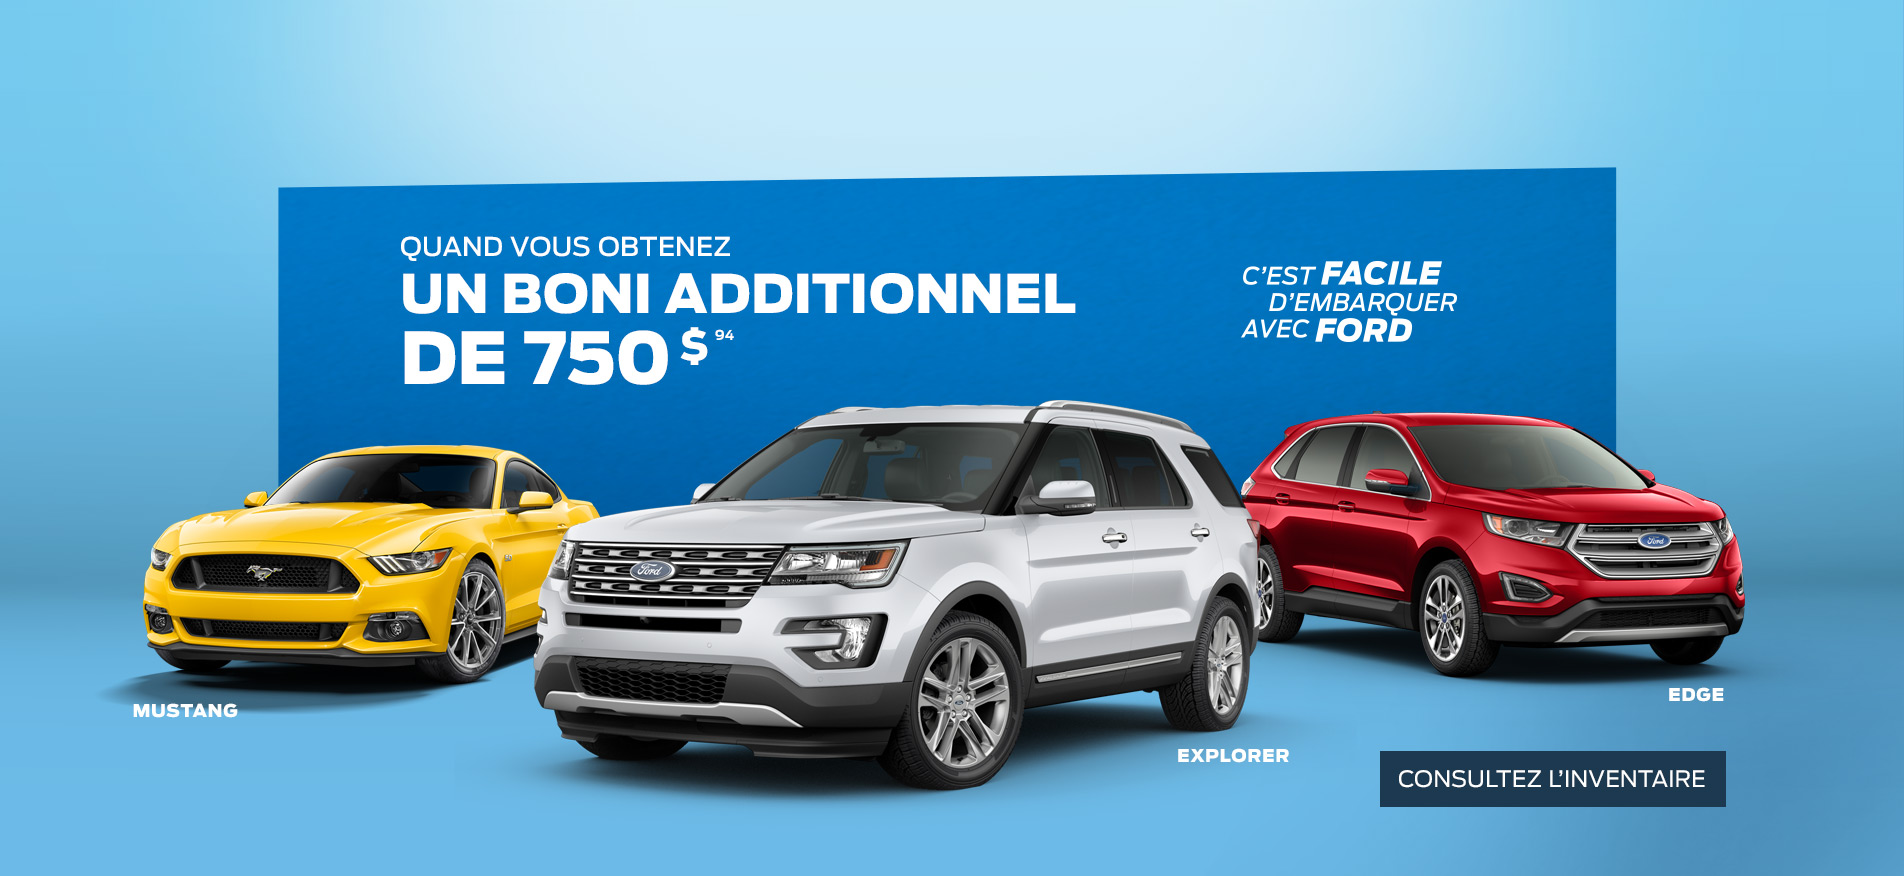 Concessionnaire ford lincoln trois-rivieres